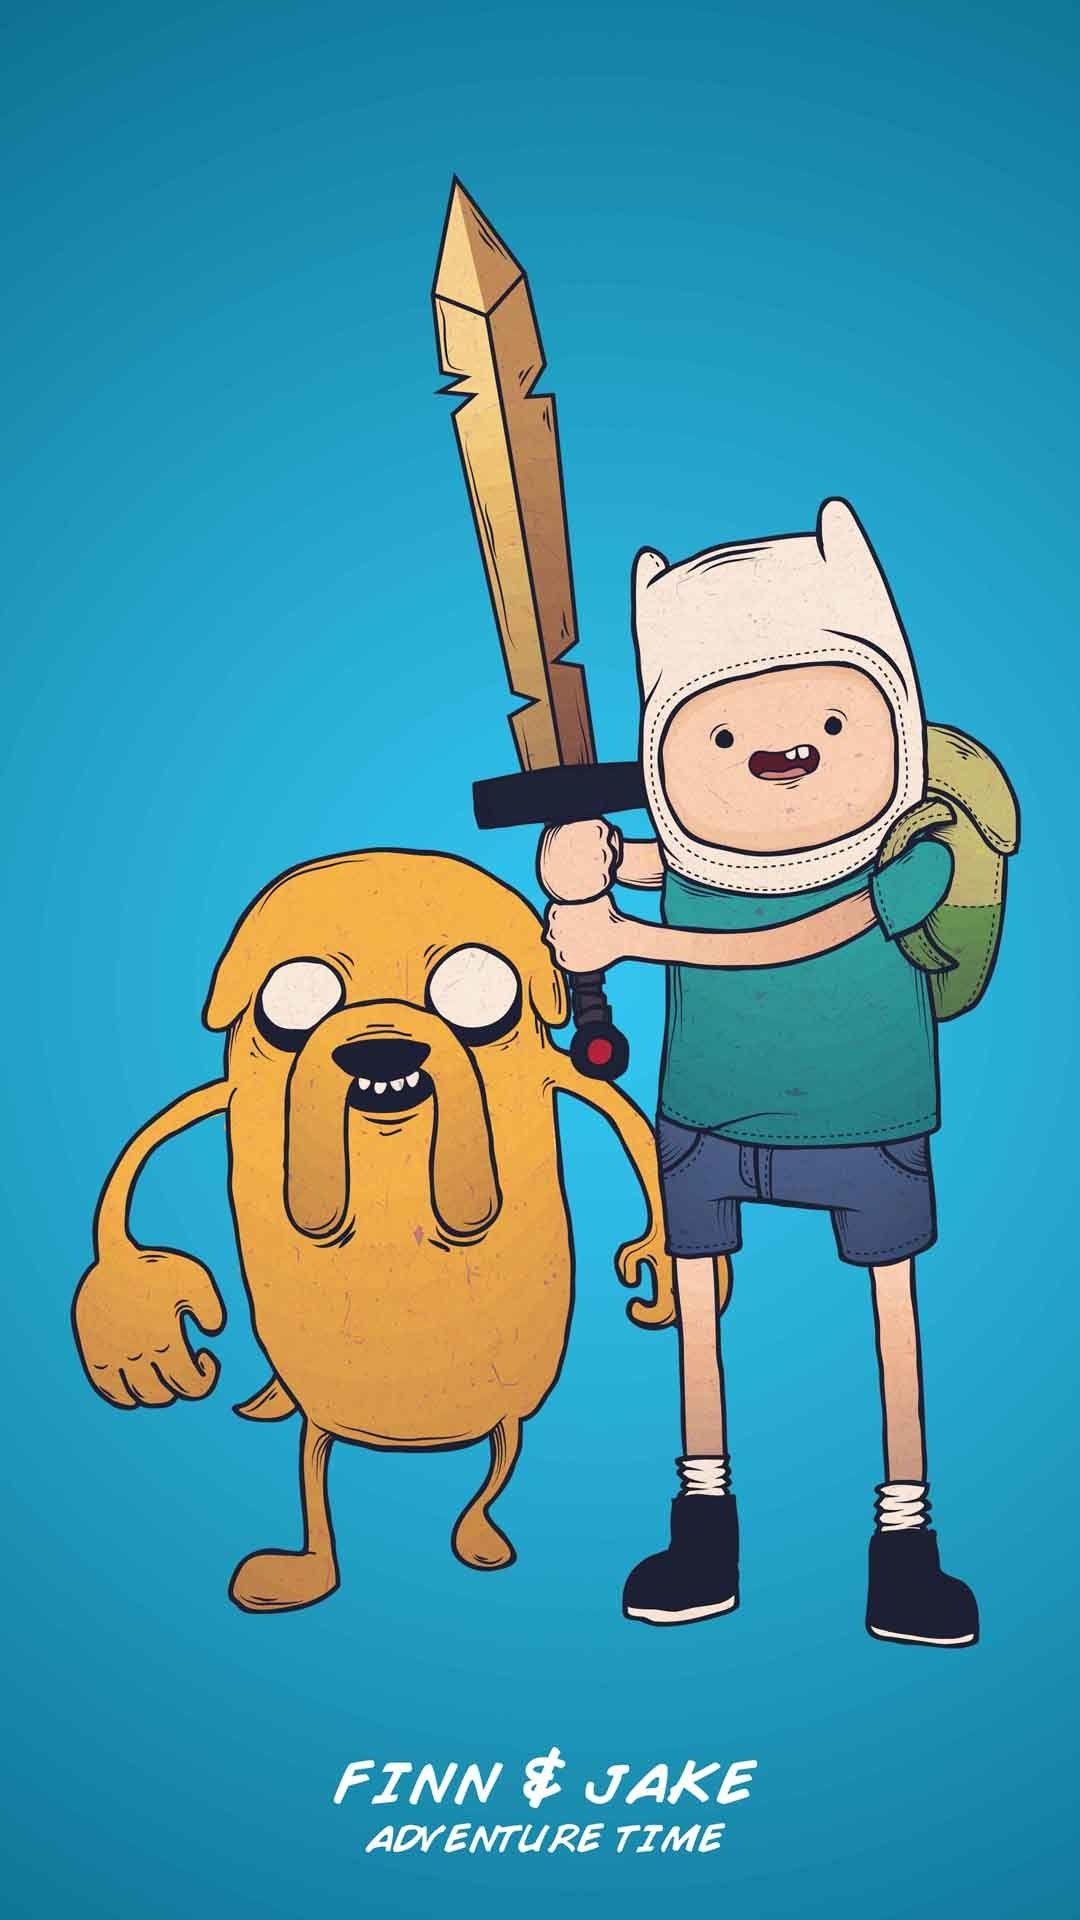 Aesthetic Adventure Time Wallpaper Android. Jake adventure time, Adventure time, Adventure time wallpaper